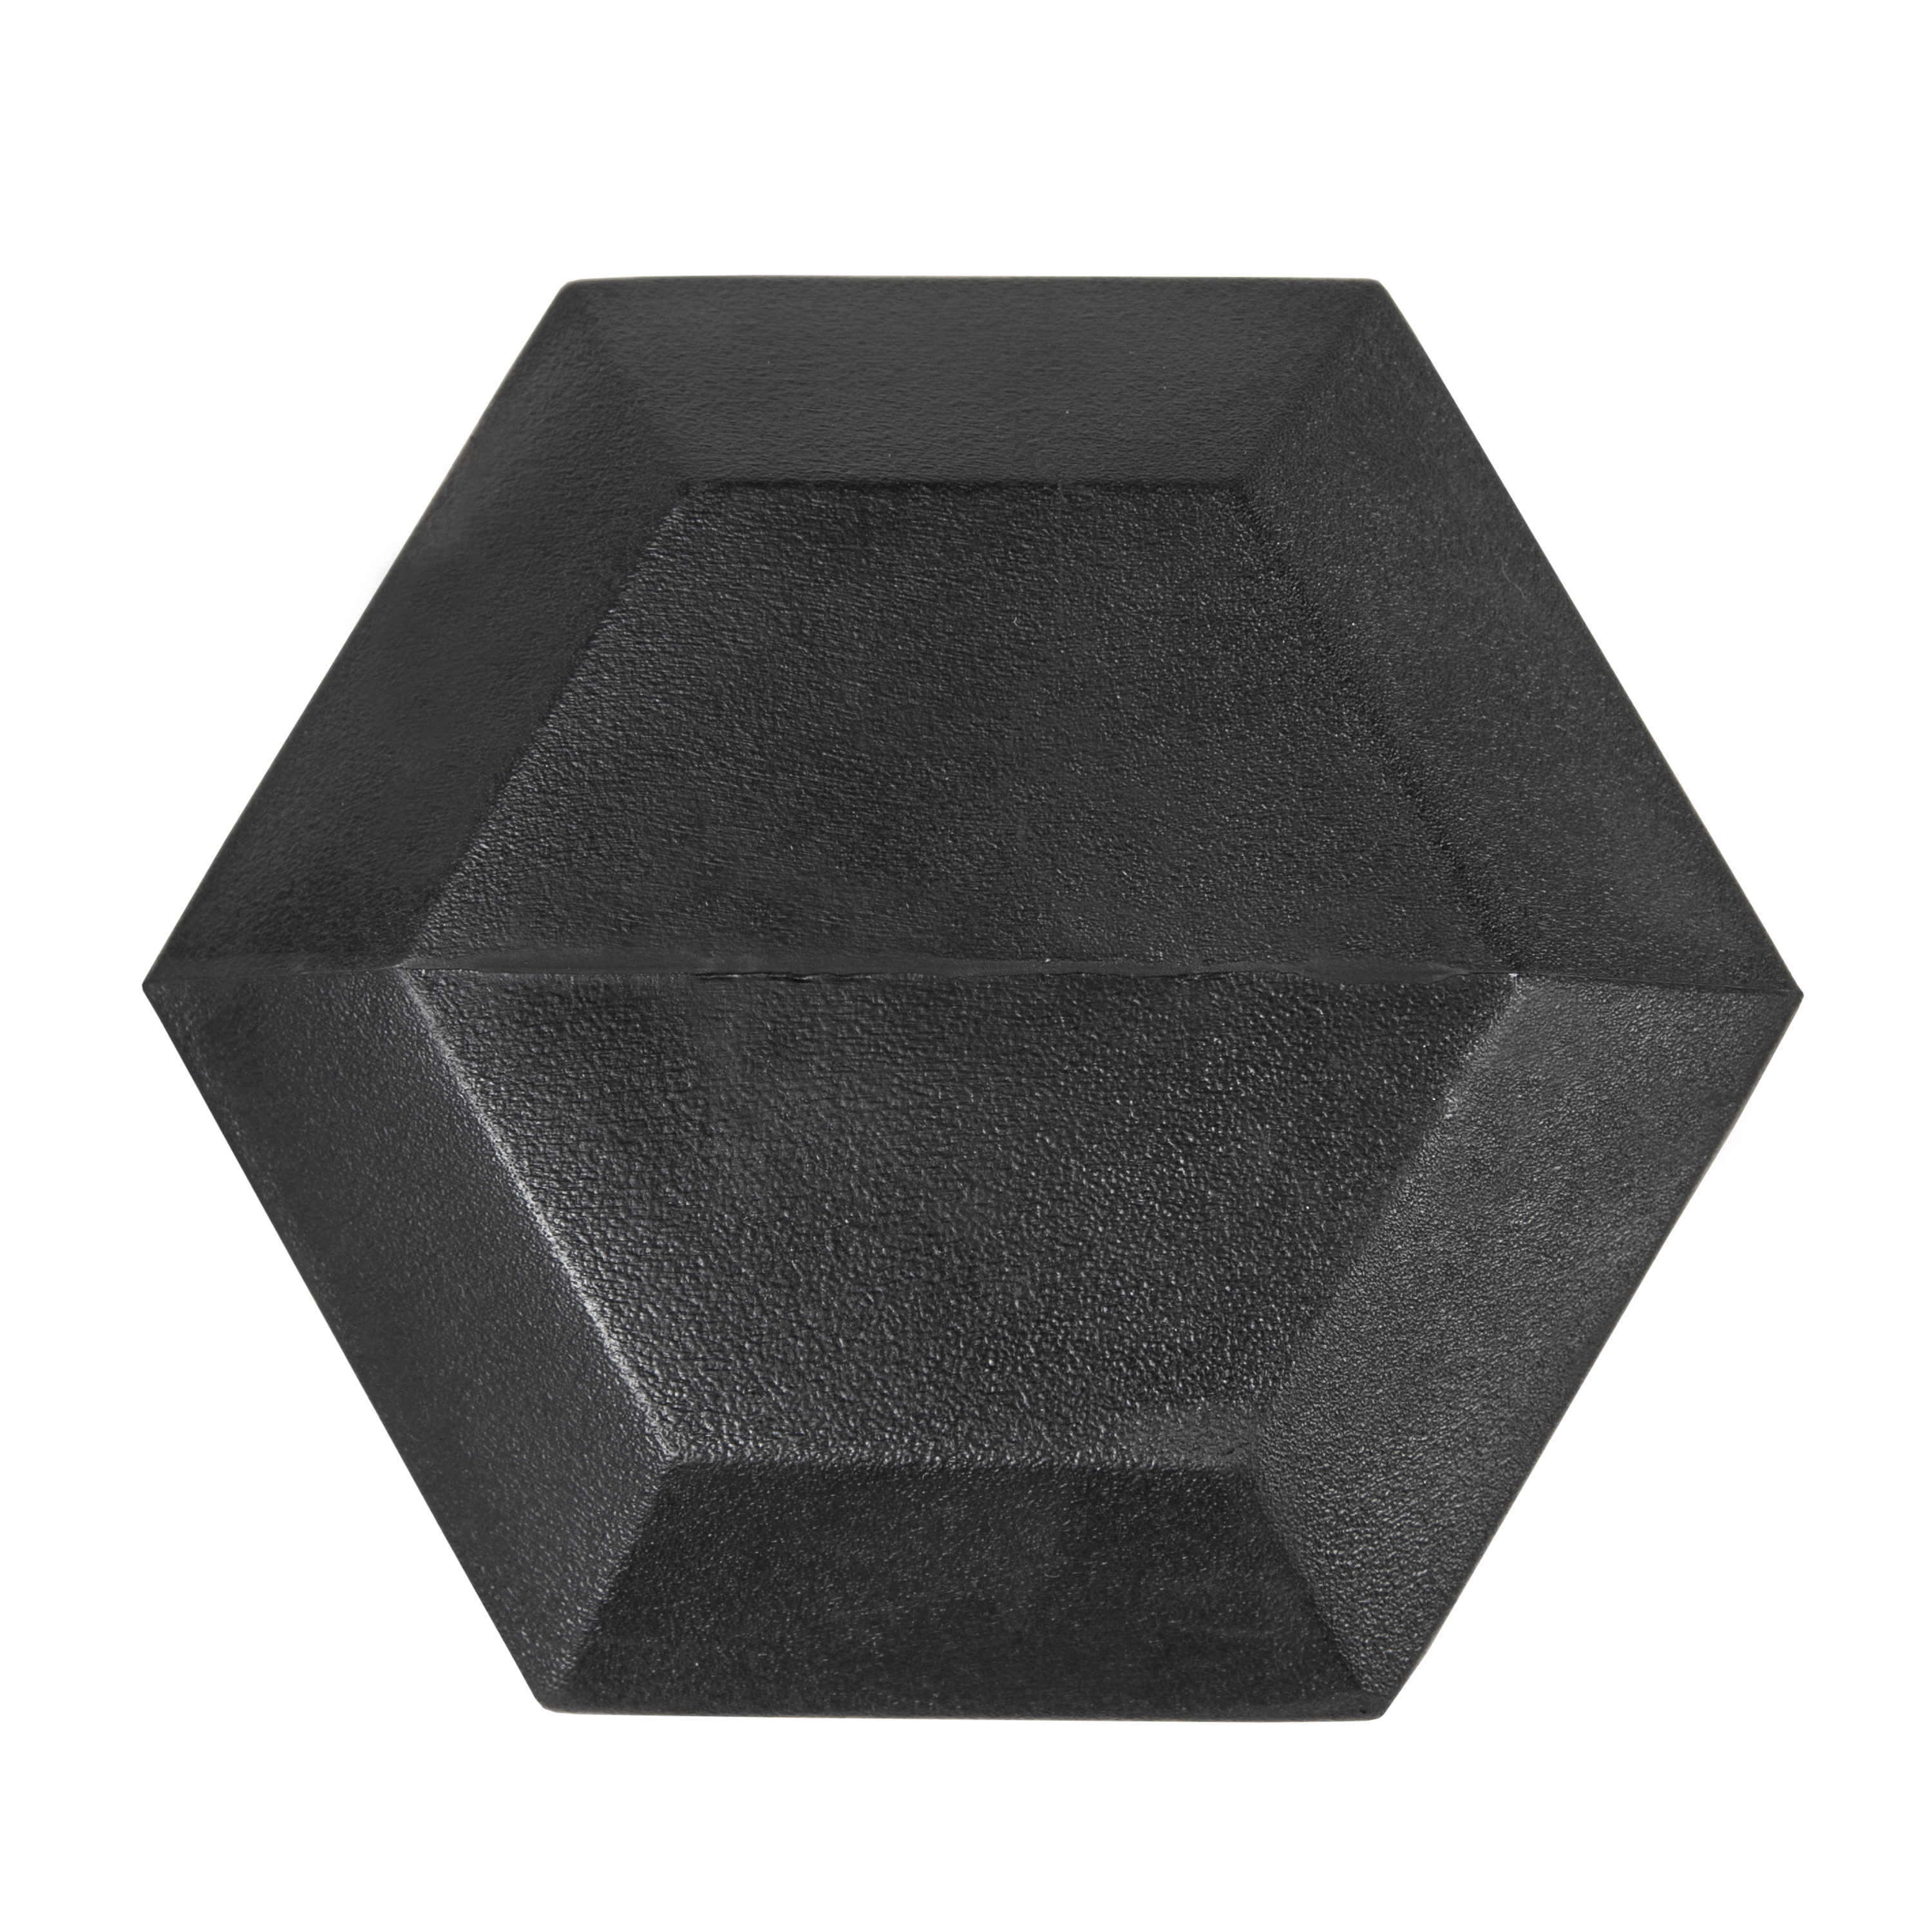 CAP Barbell, 40lb Rubber Hex Dumbbell, Single - image 3 of 6